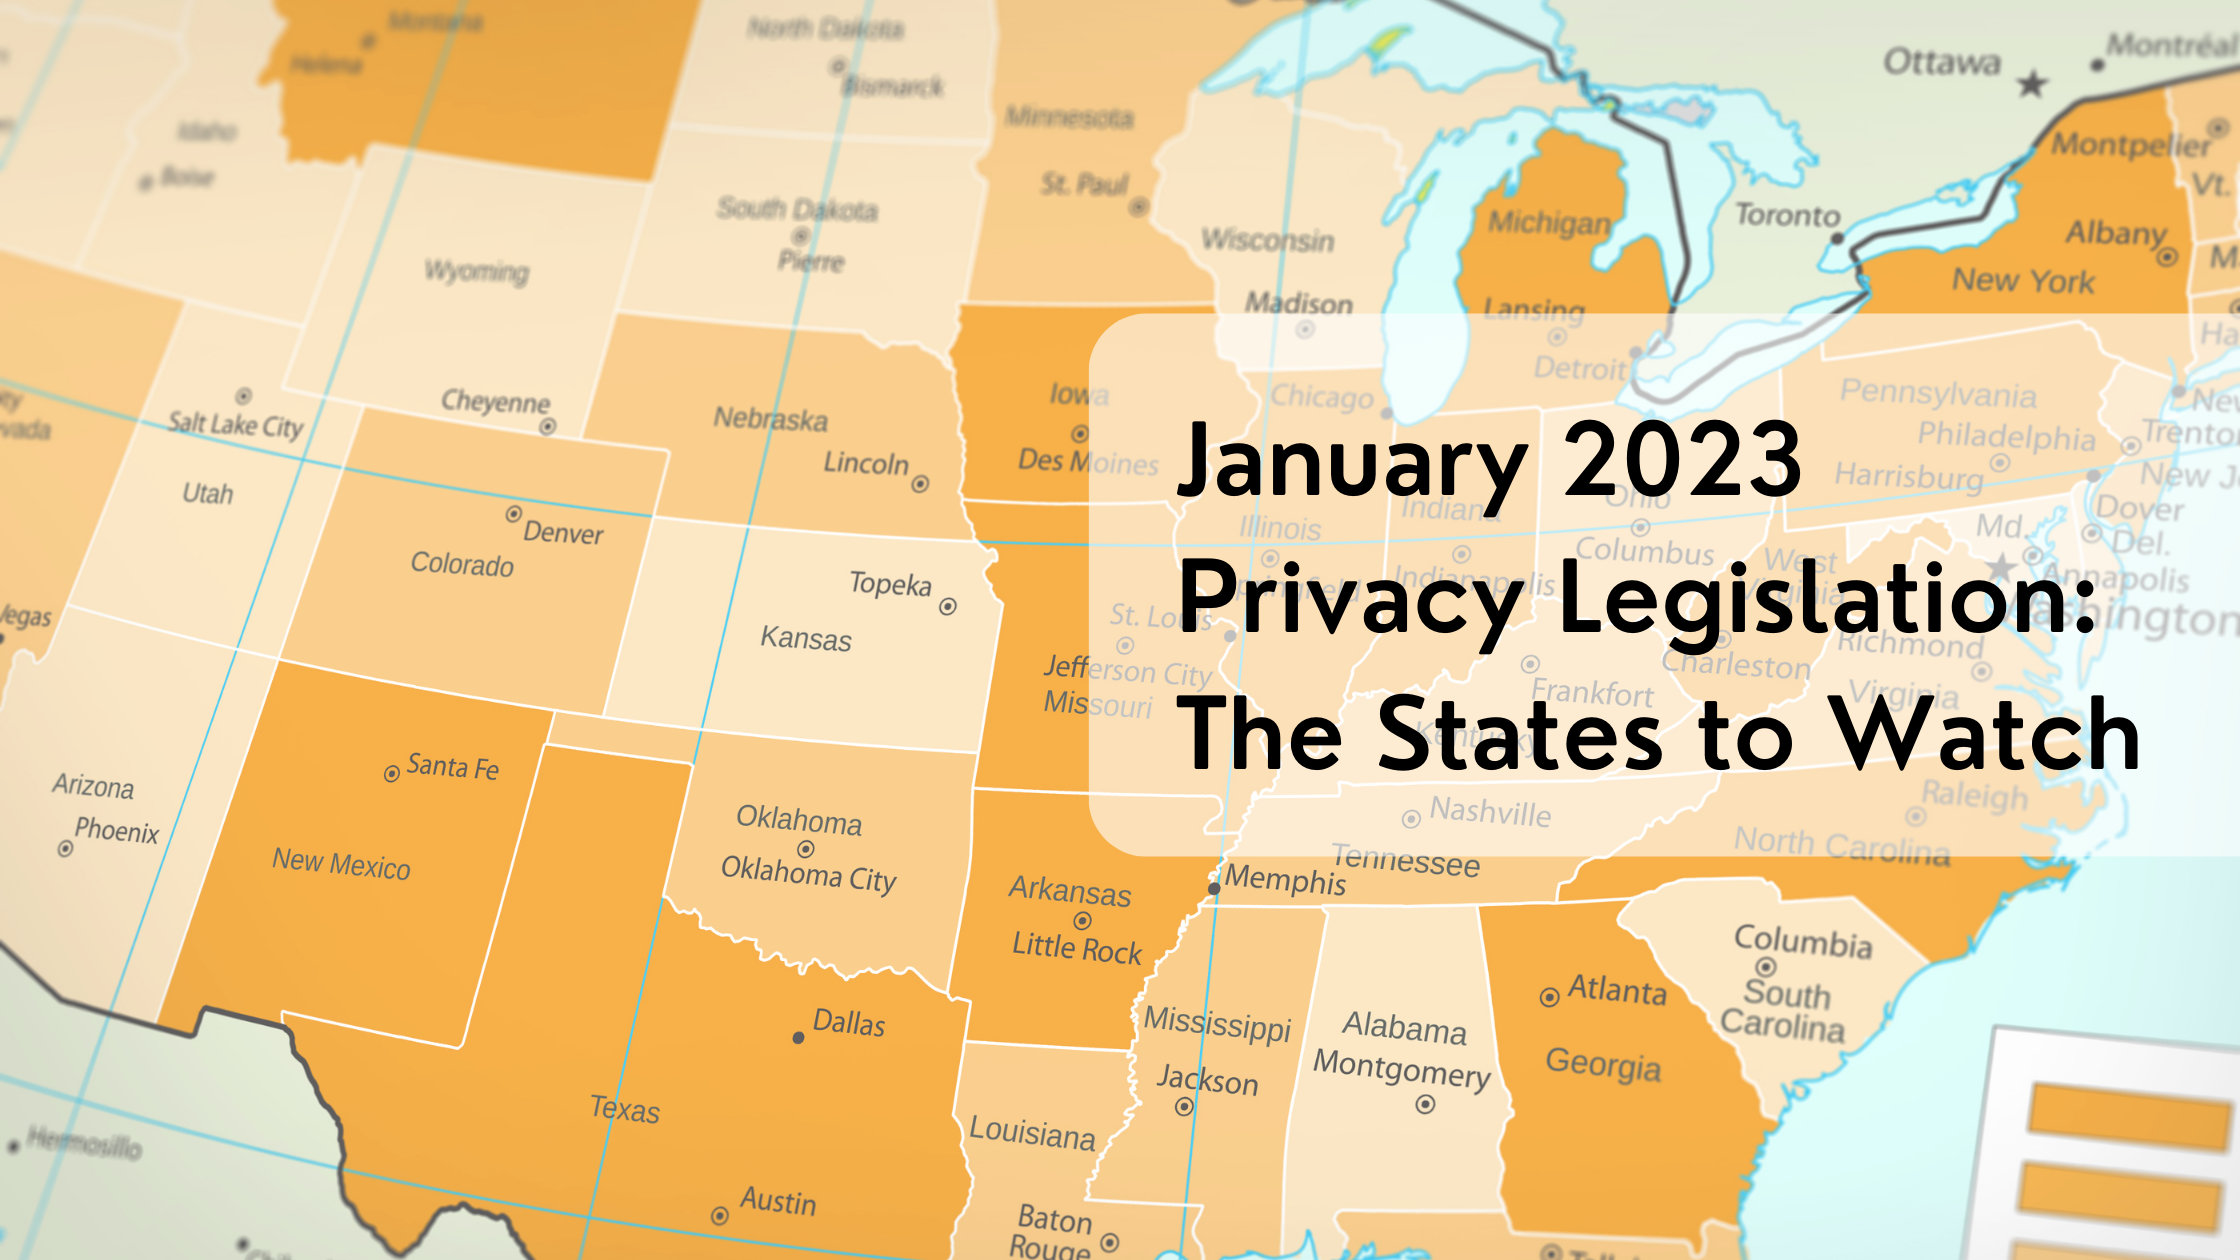 January 2023 Privacy Legislation: The States to Watch